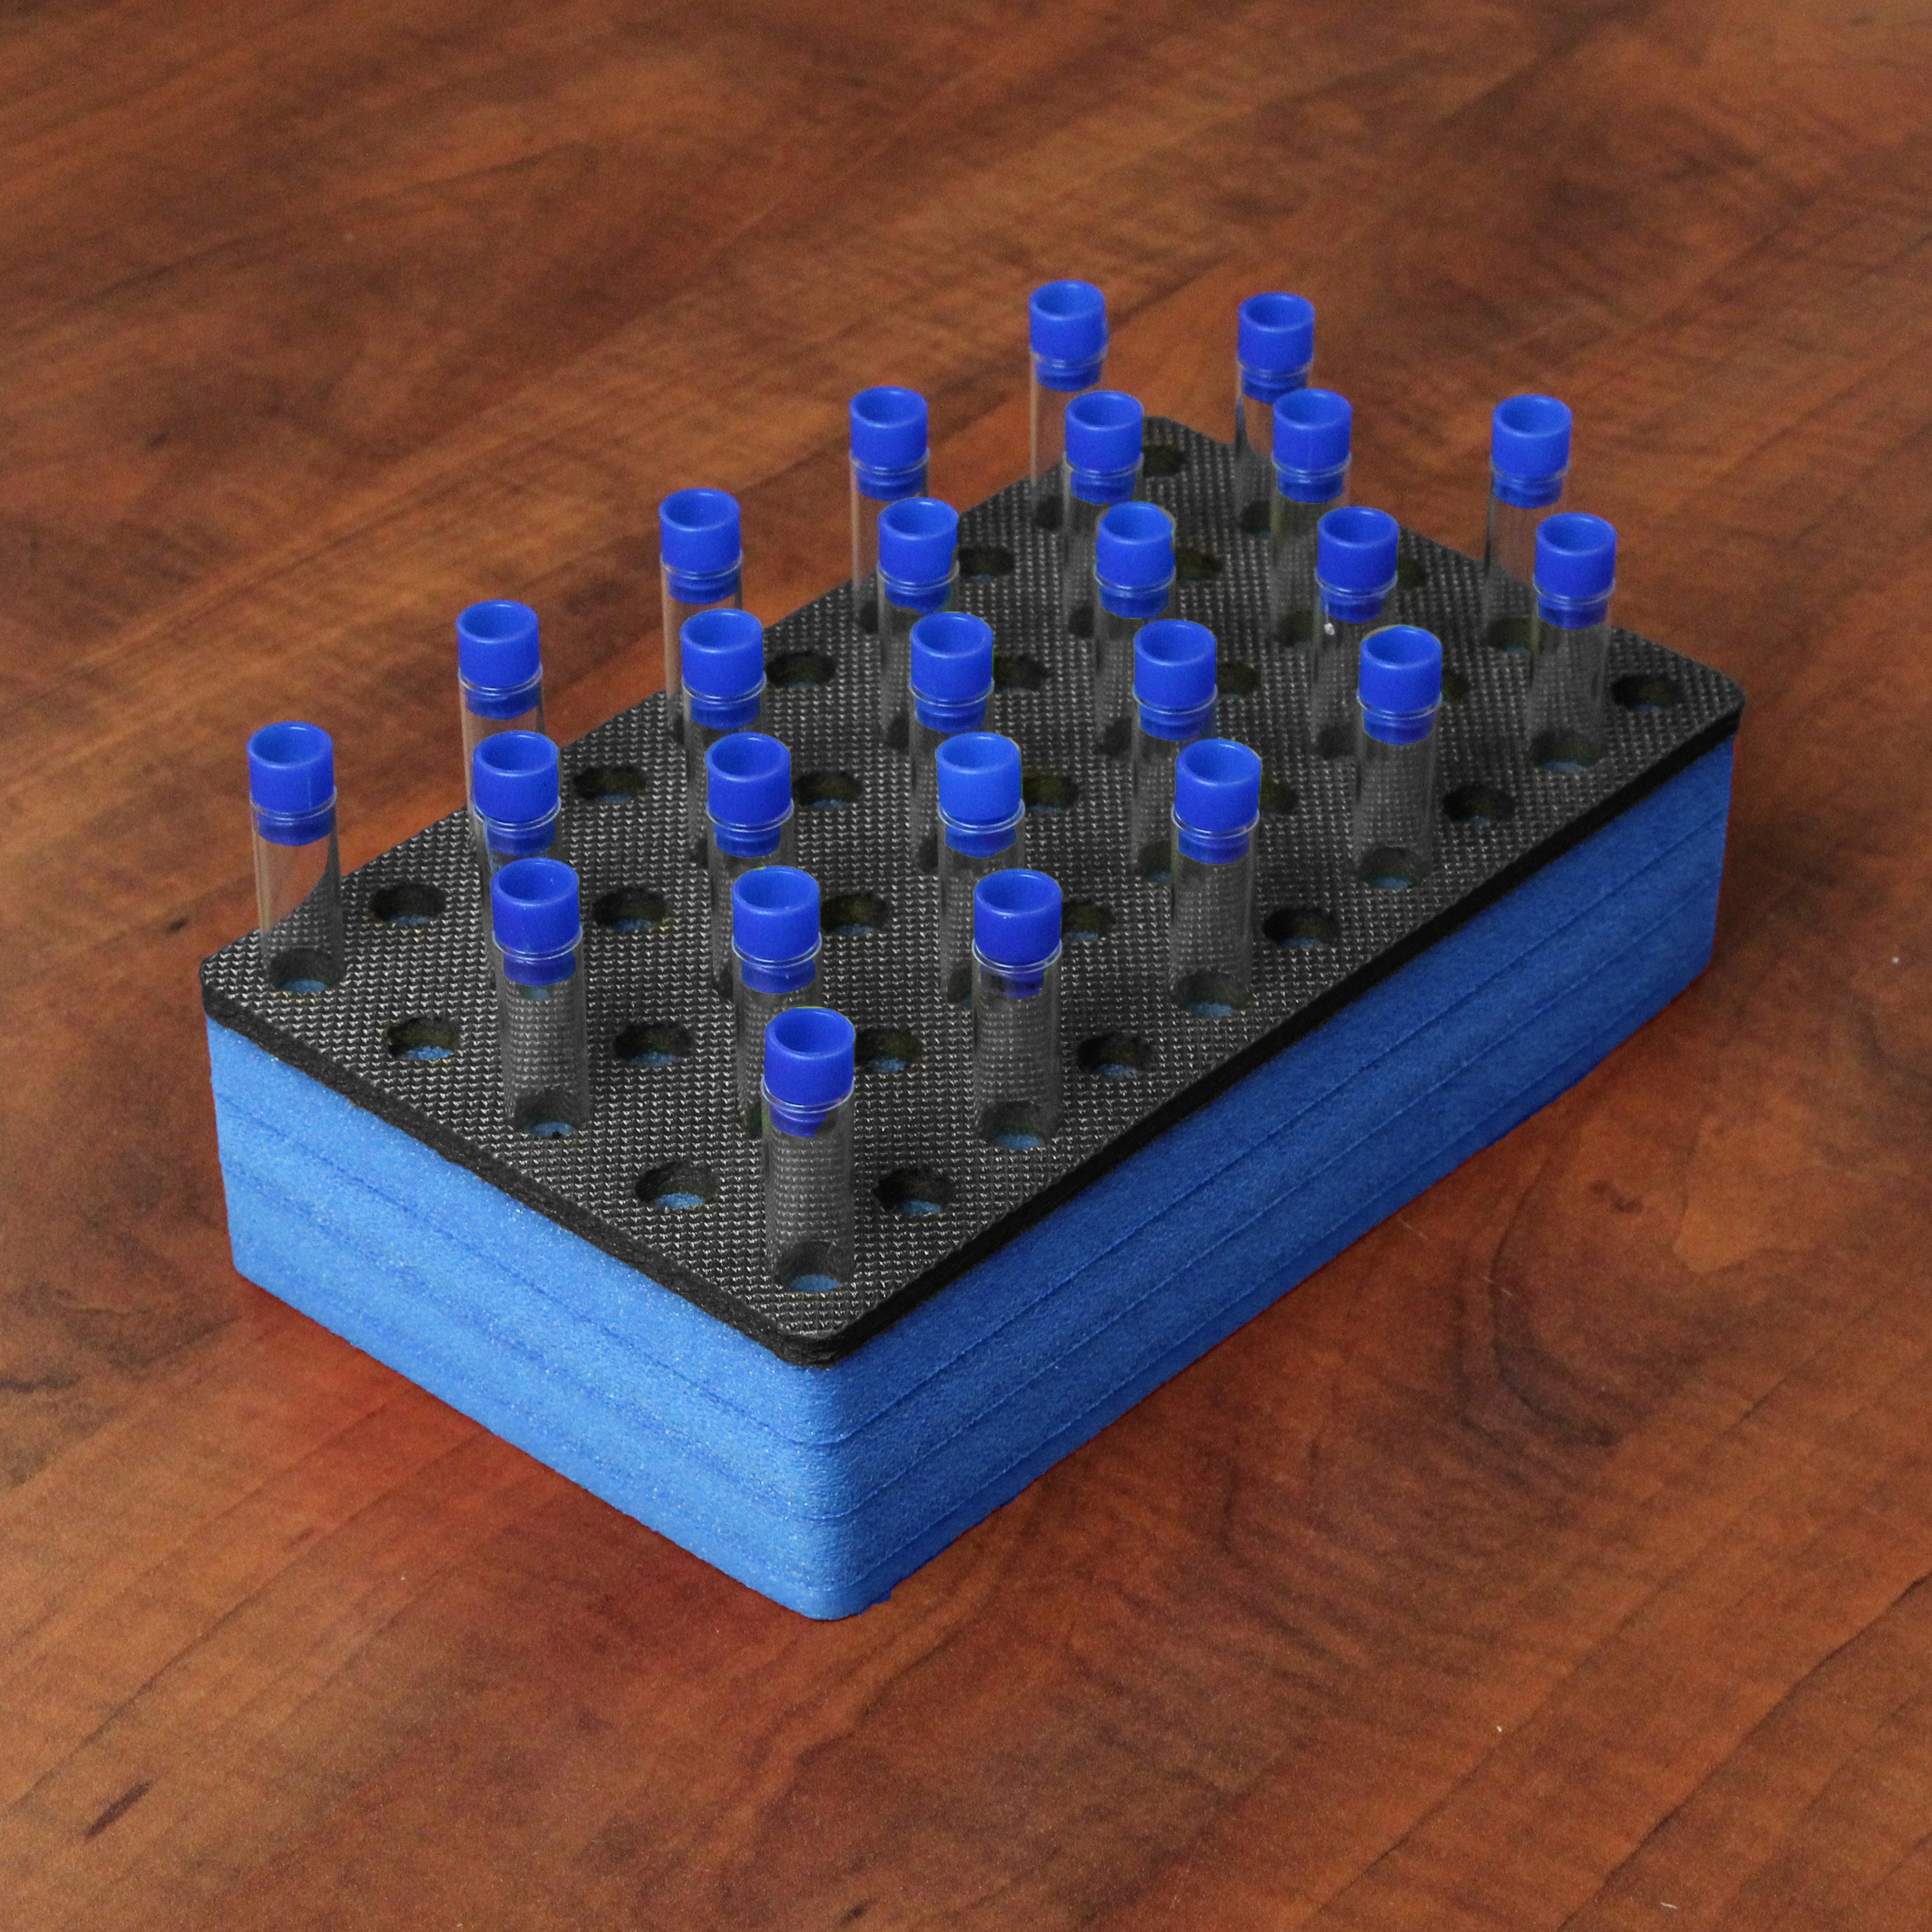 Polar Whale Test Tube Rack Blue and Black Foam Storage Rack Organizer Stand Transport Holds 50 Tubes Each Fits up to 12mm Diameter Tubes